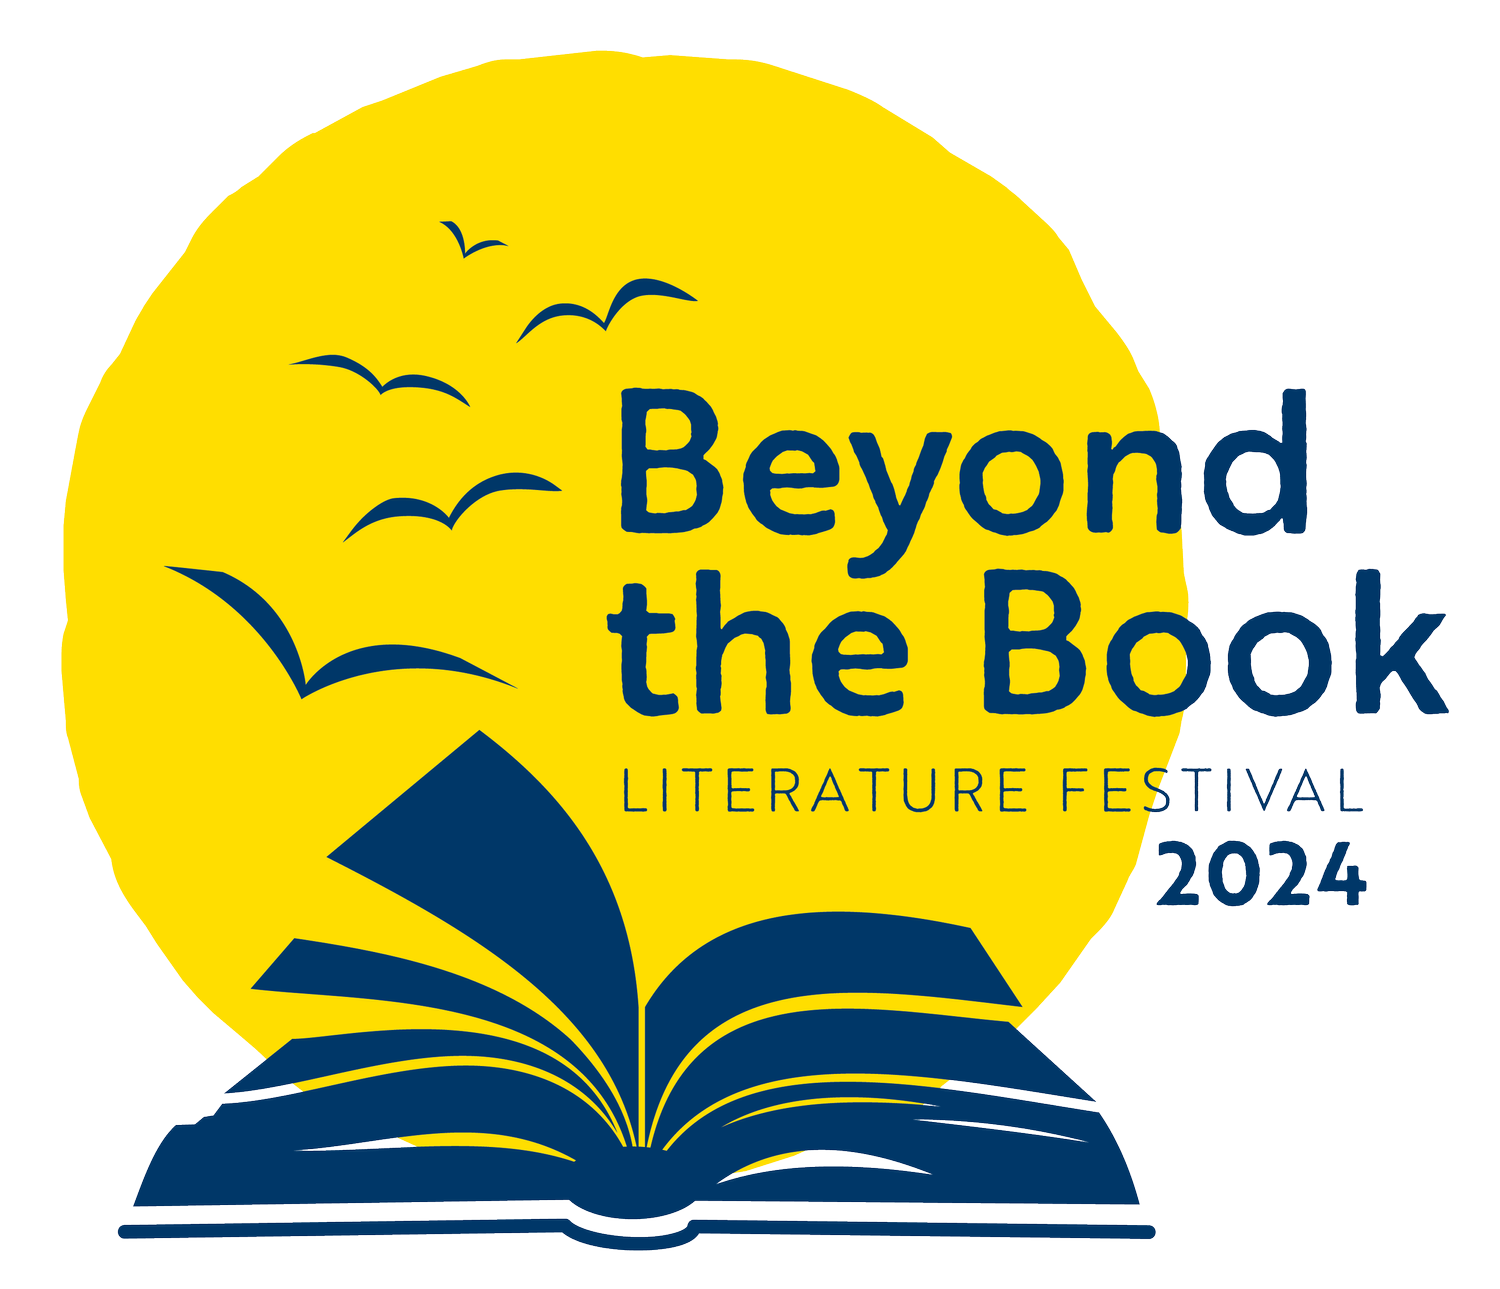 An Annual Youth Literature Festival